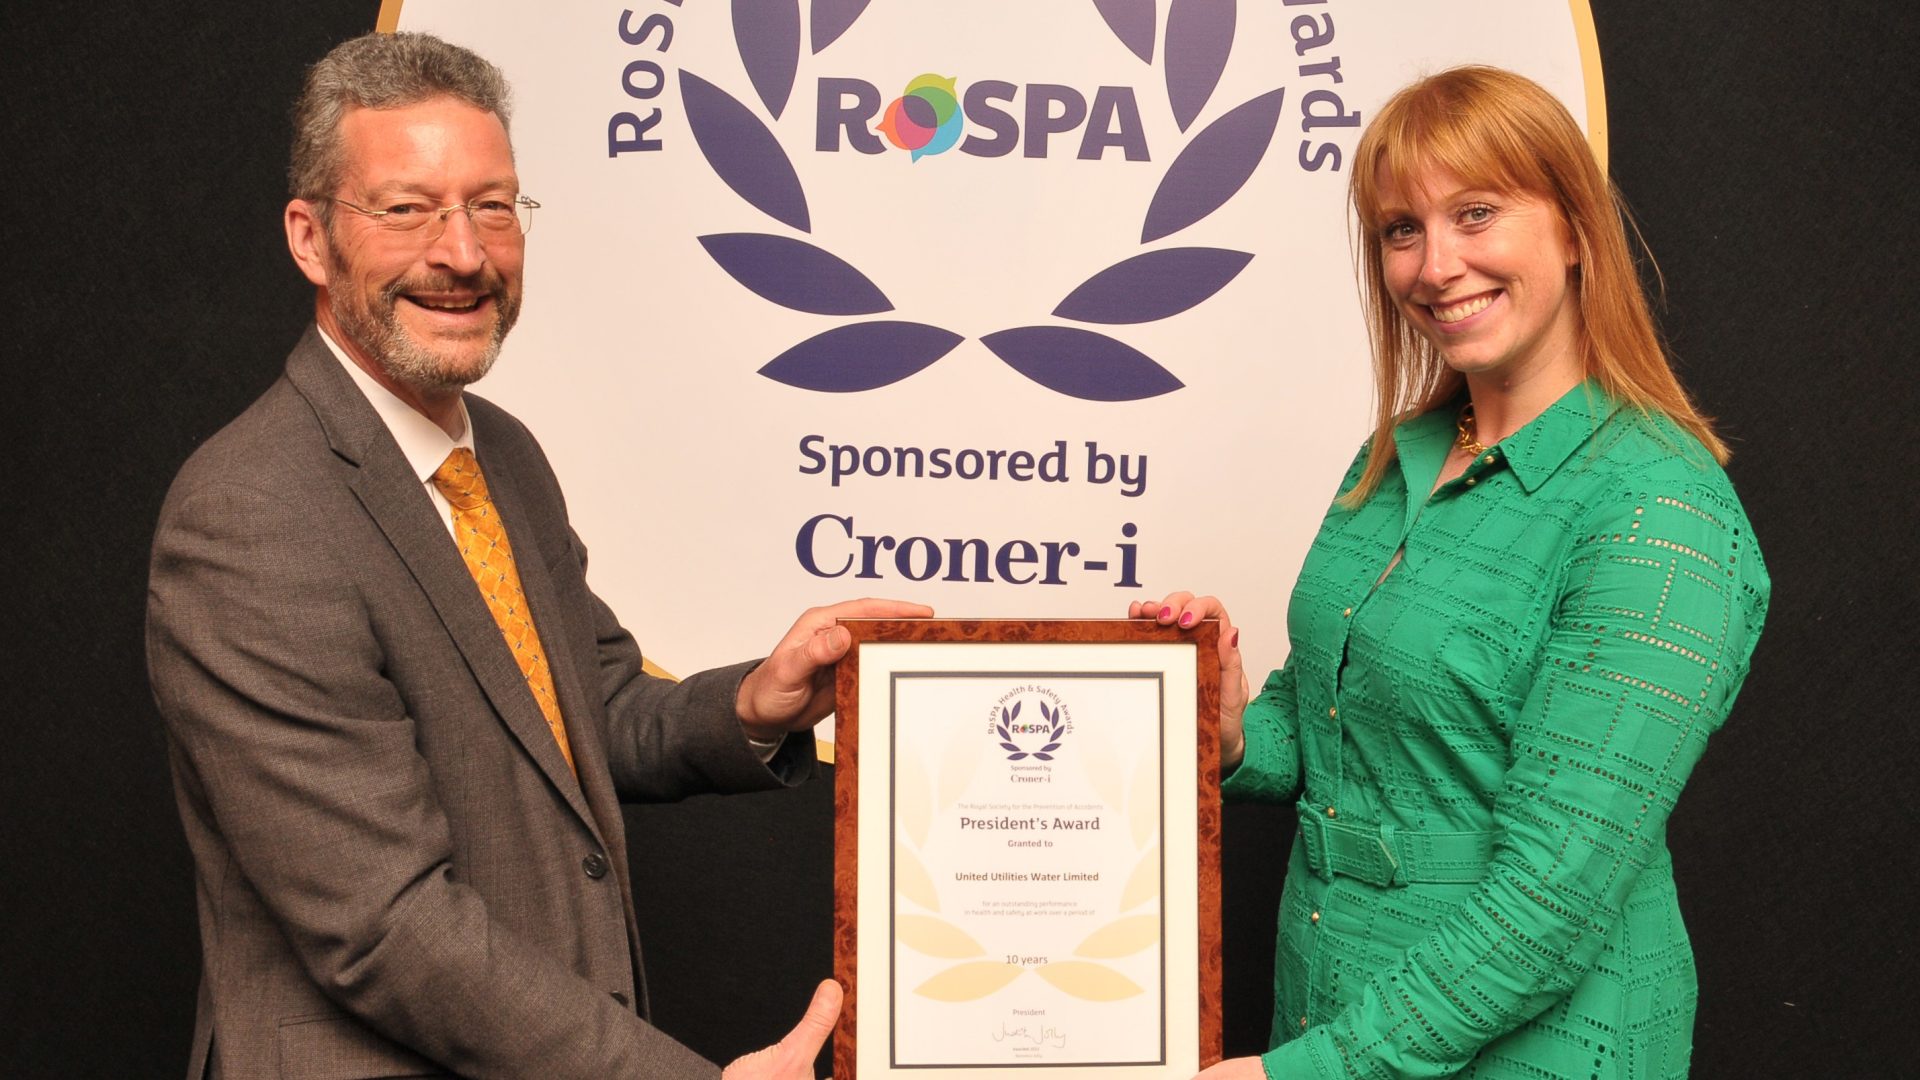 Erroll Taylor, RoSPA Chief Executive Officer, and Sian Corr, Lead Health & Safety Business Partner at United Utilities